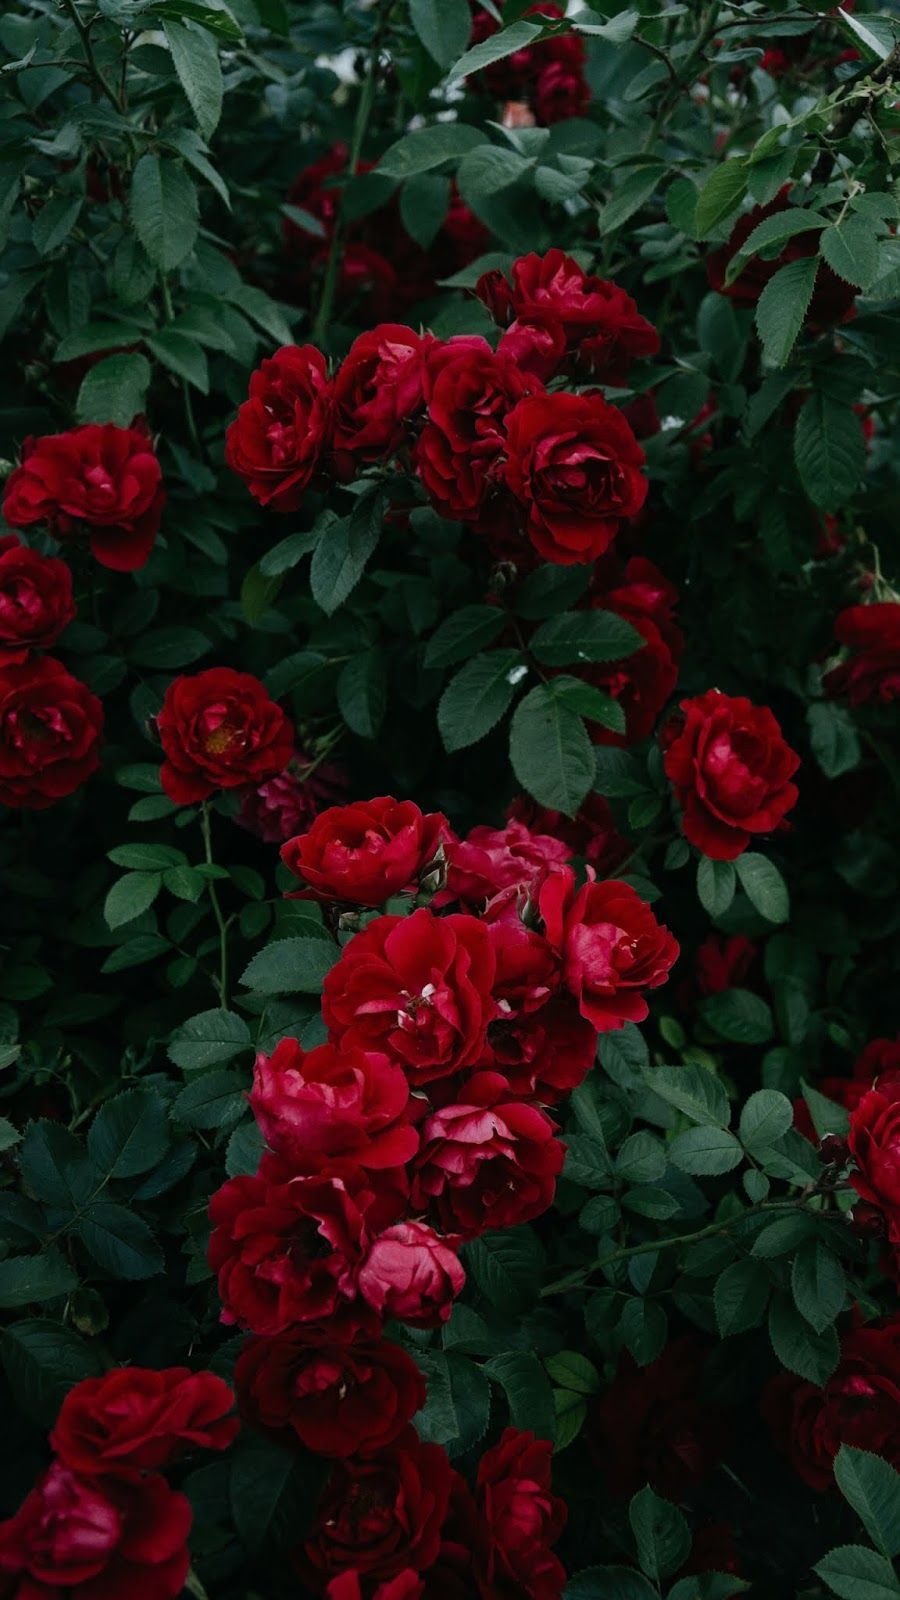 A close up of some red roses - Roses